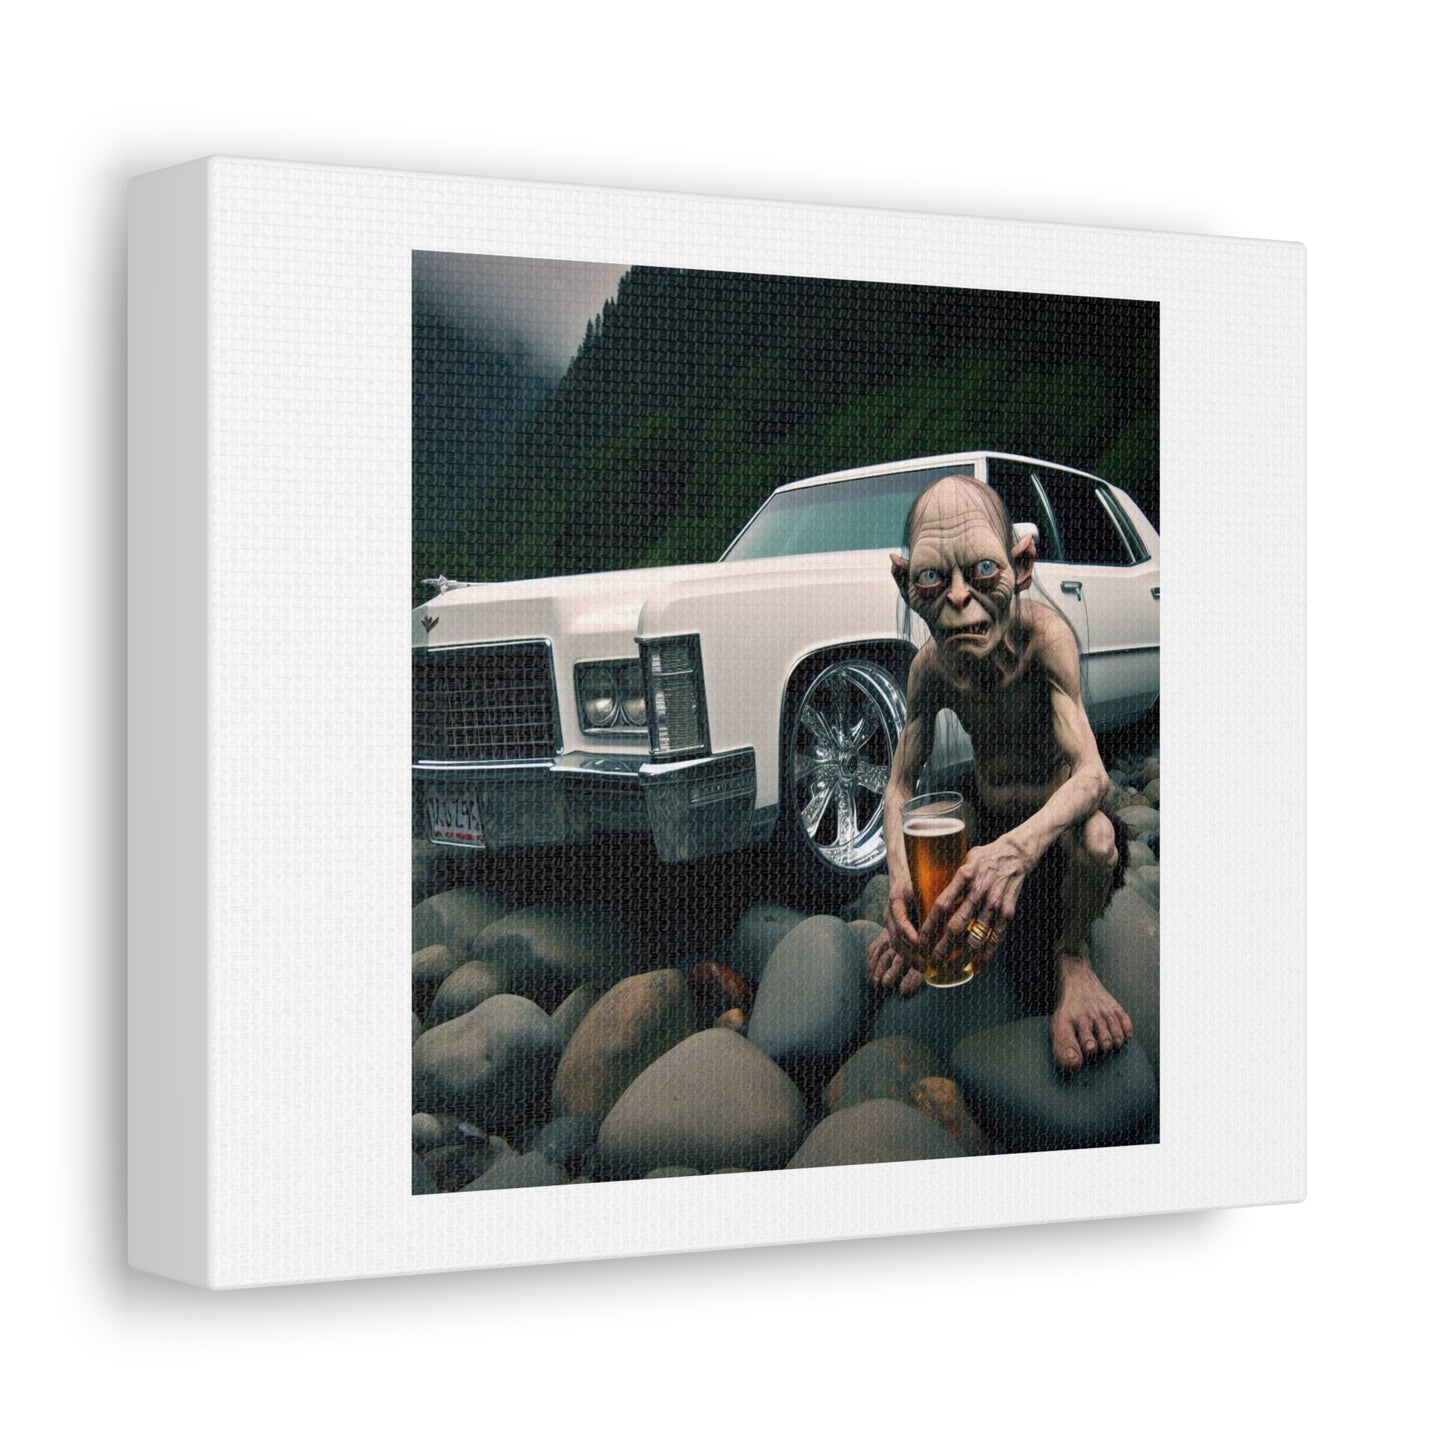 A New Movie Just Dropped 'The Lord of the Rims' 'Designed by AI' Art Print on Canvas